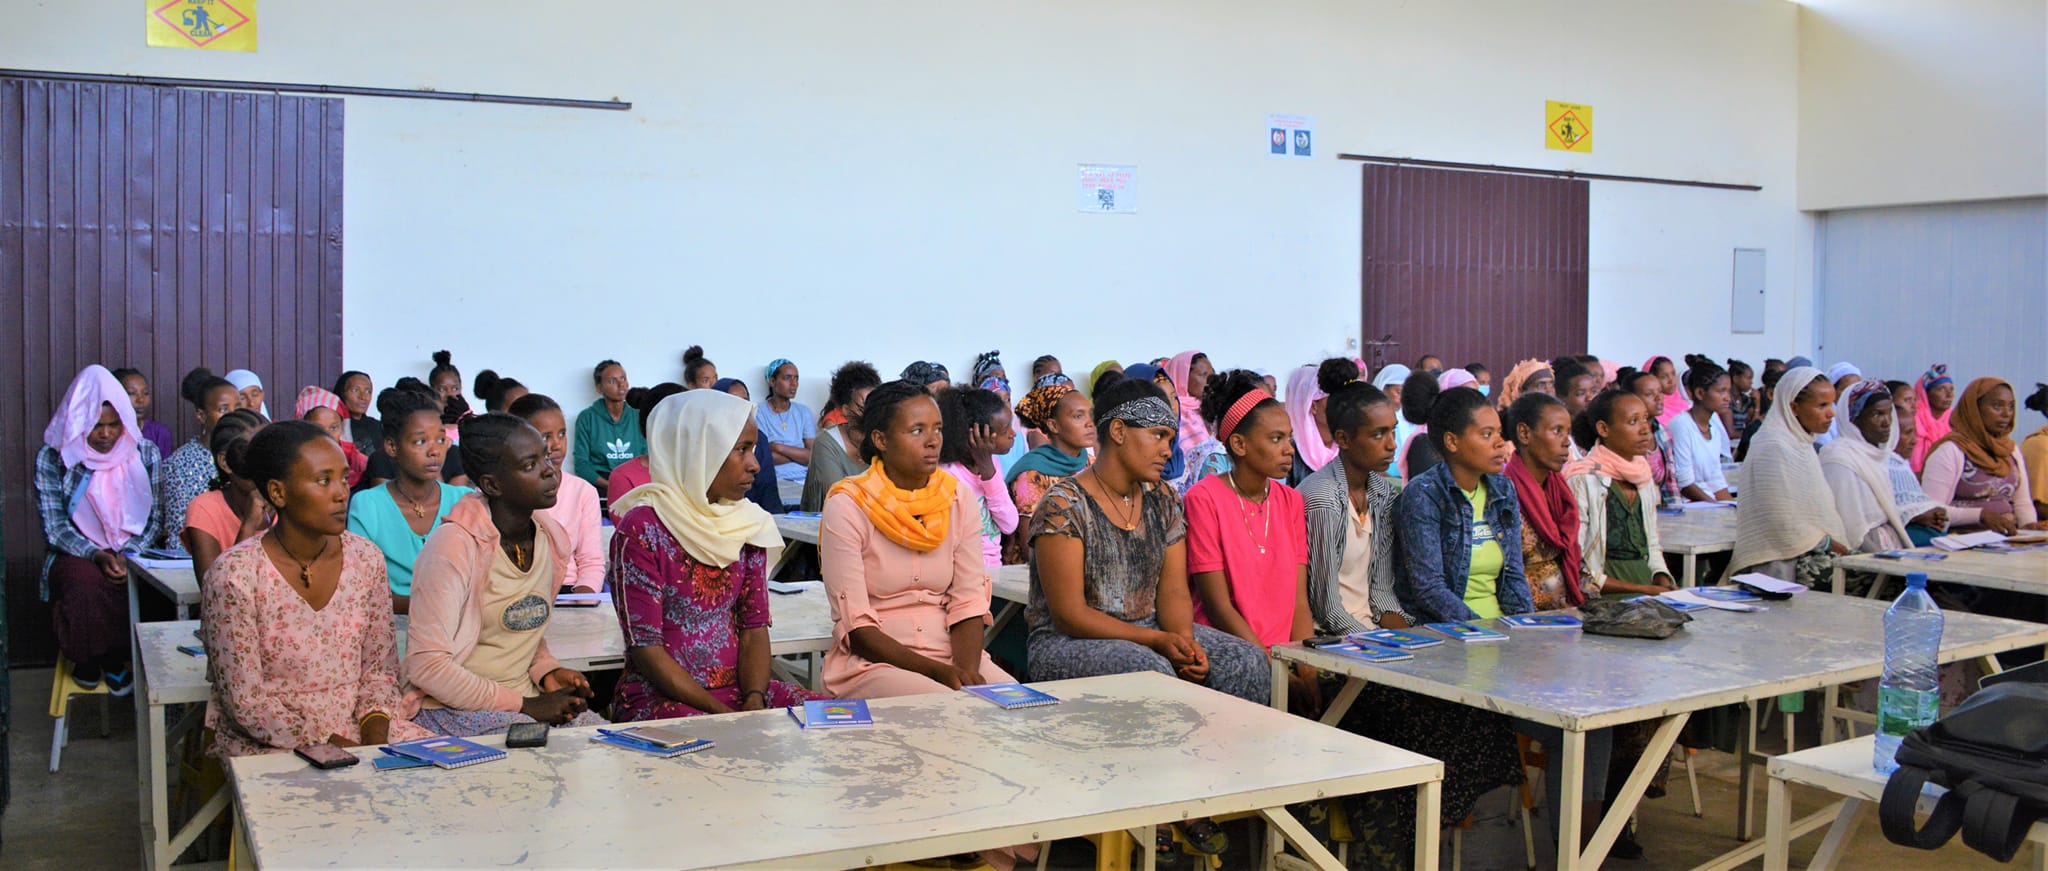 EHPEA TVET Center provided a training in collaboration with UNIDO